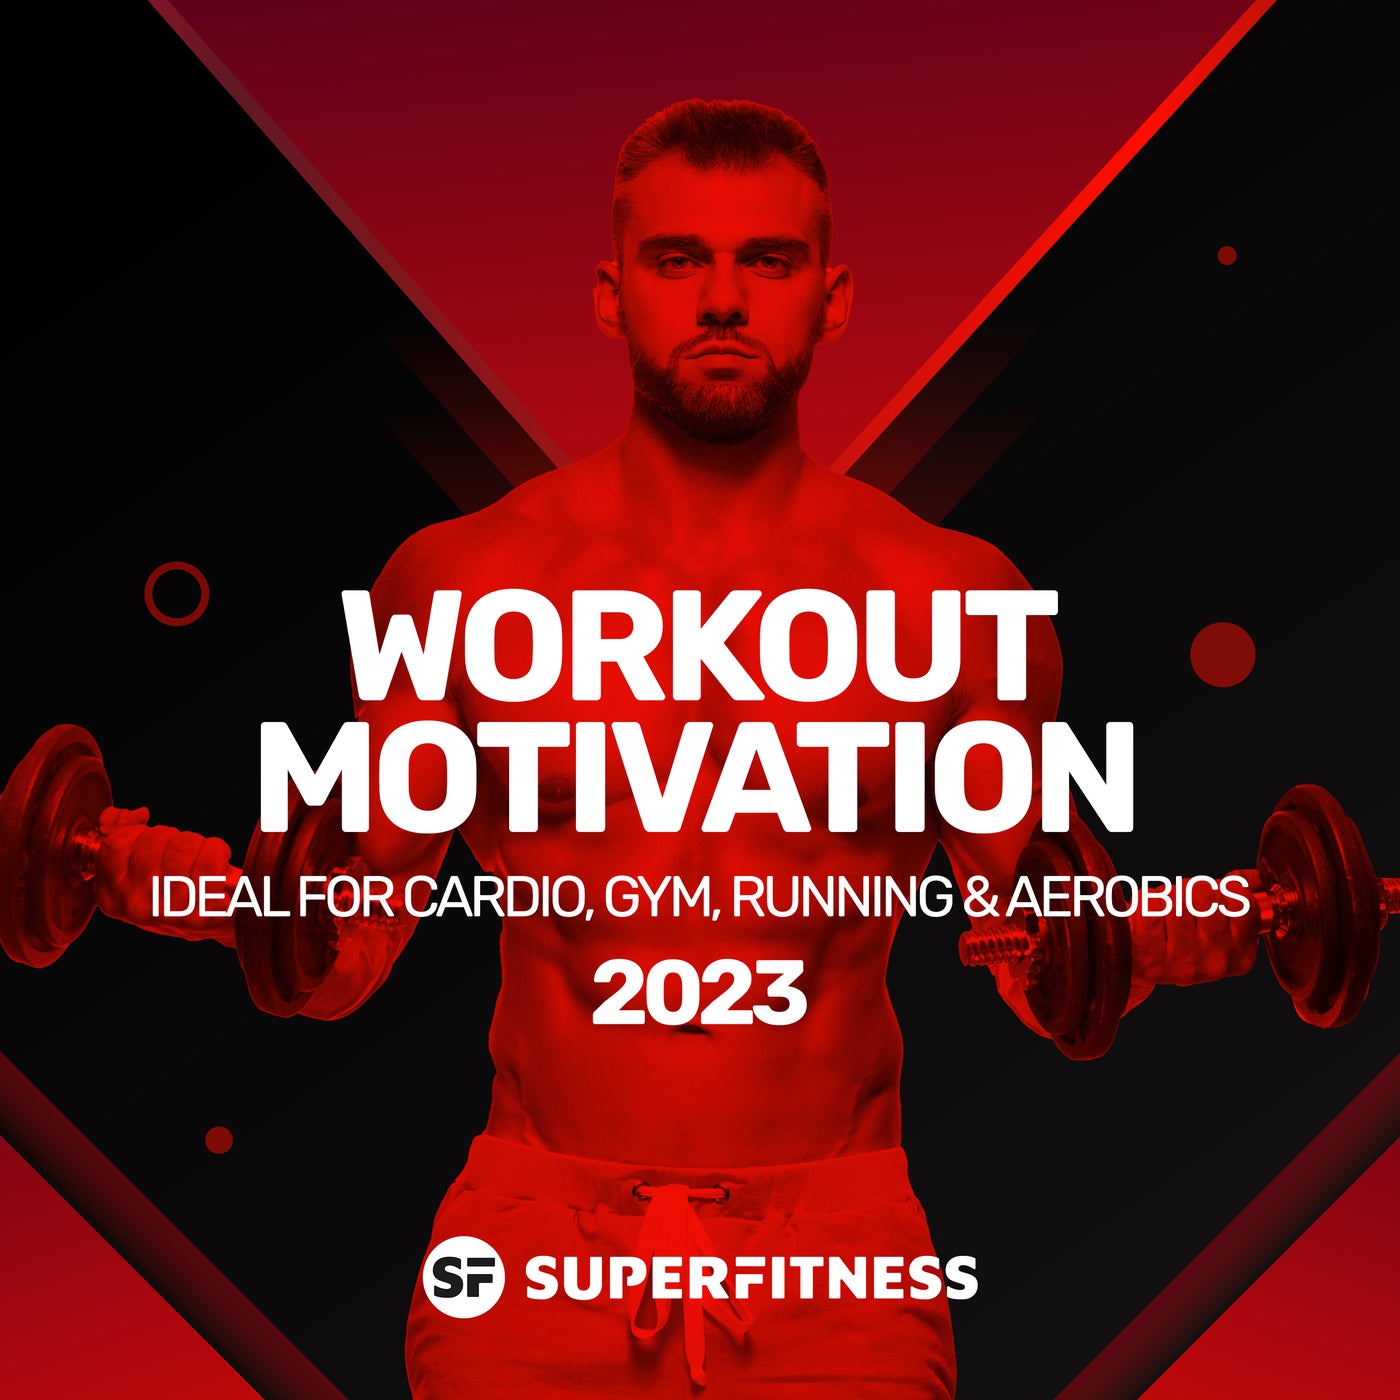 Workout Motivation 2023 (Ideal For Cardio, Gym, Running & Aerobics)